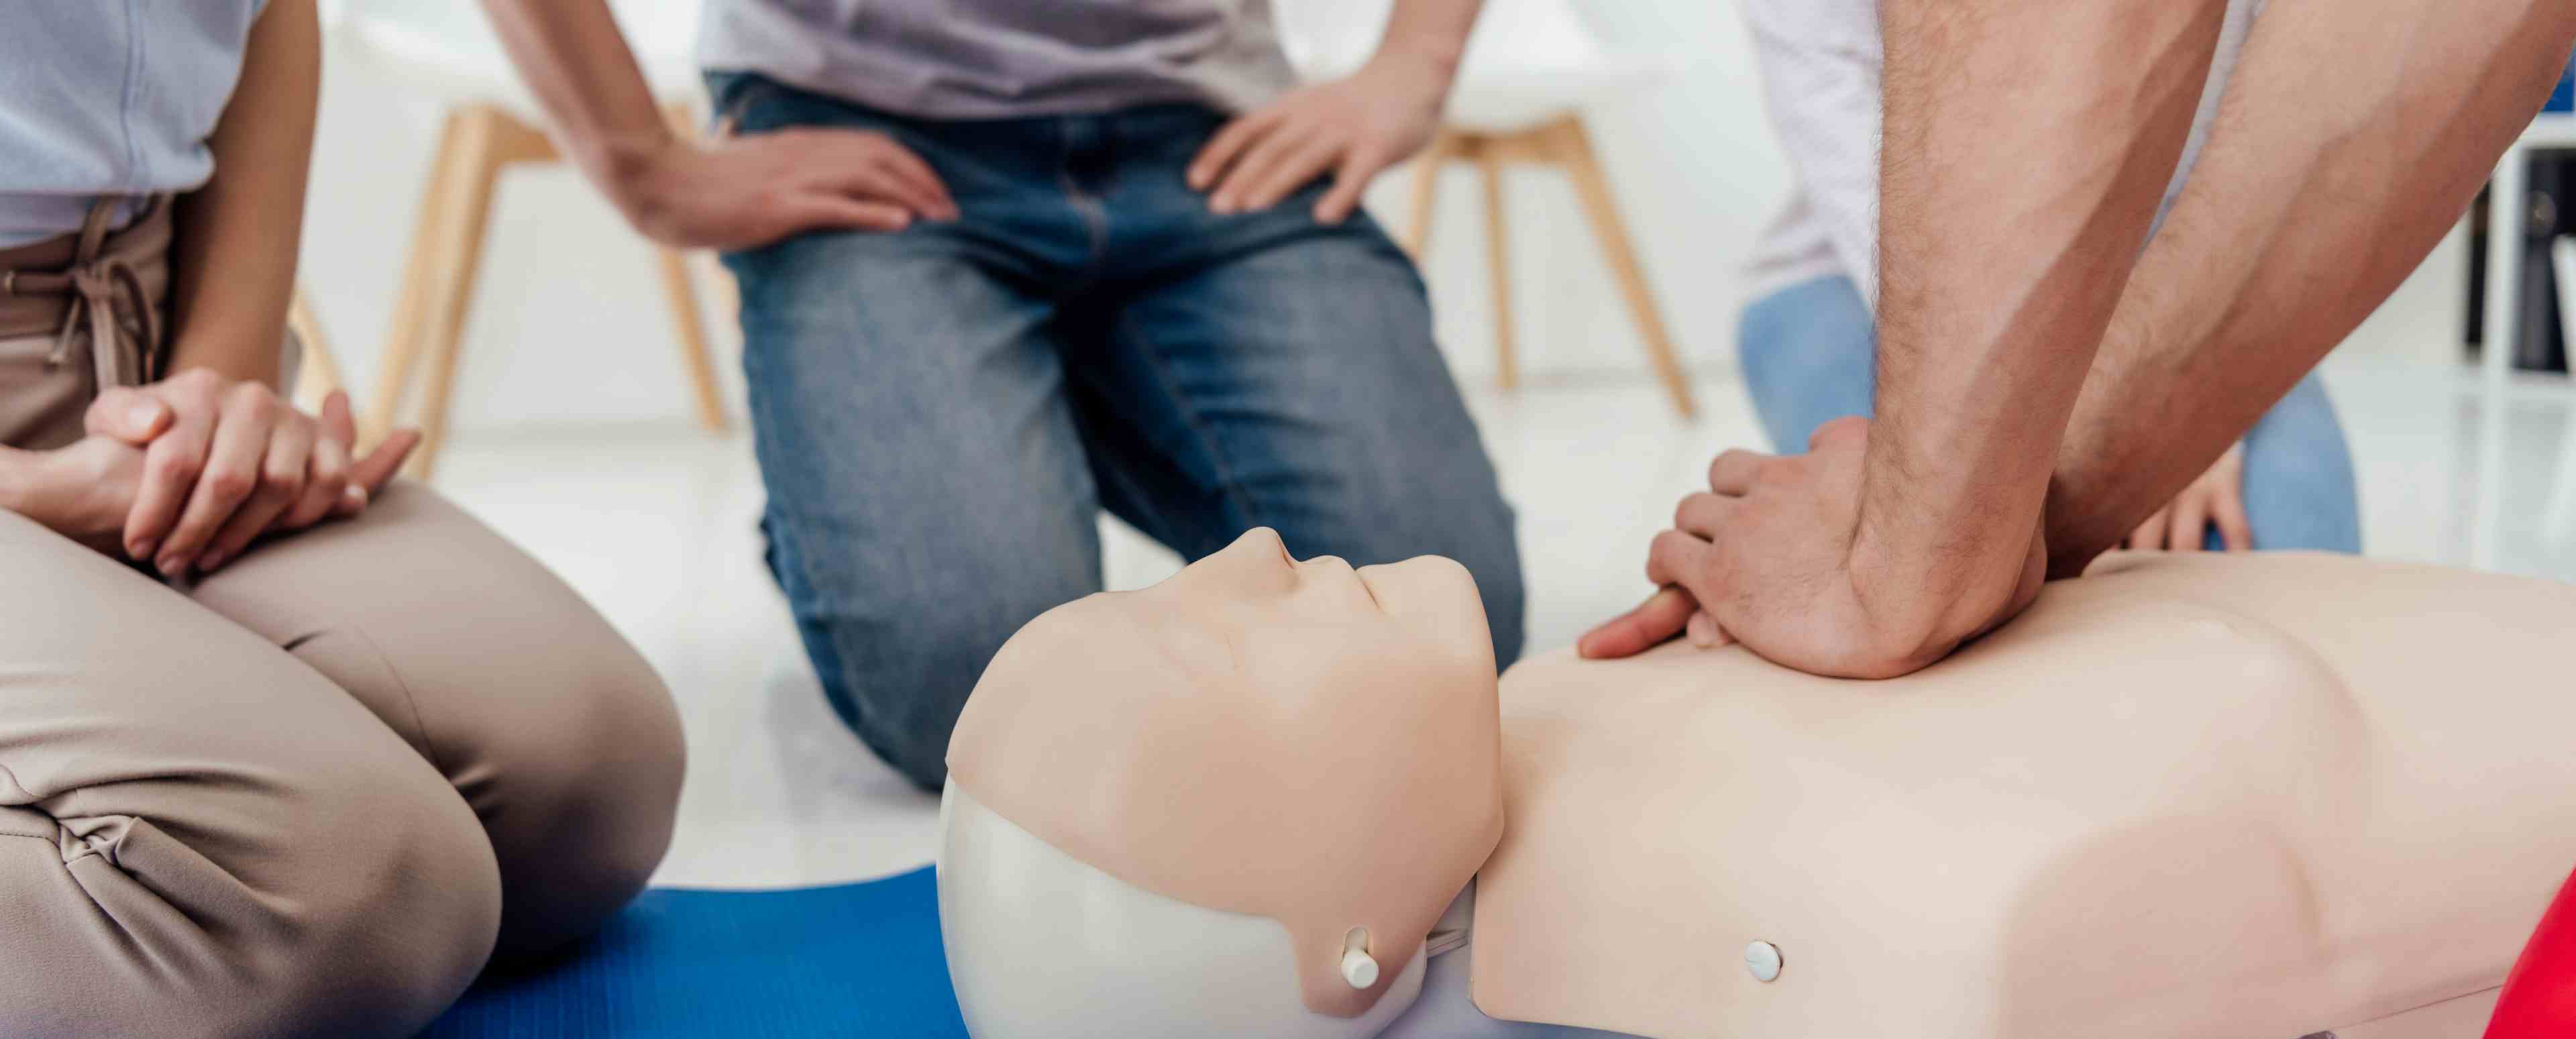 cropped view of man performing chest compression on dummy during cpr training class - Image credit: LIGHTFIELD STUDIOS | stock.adobe.com